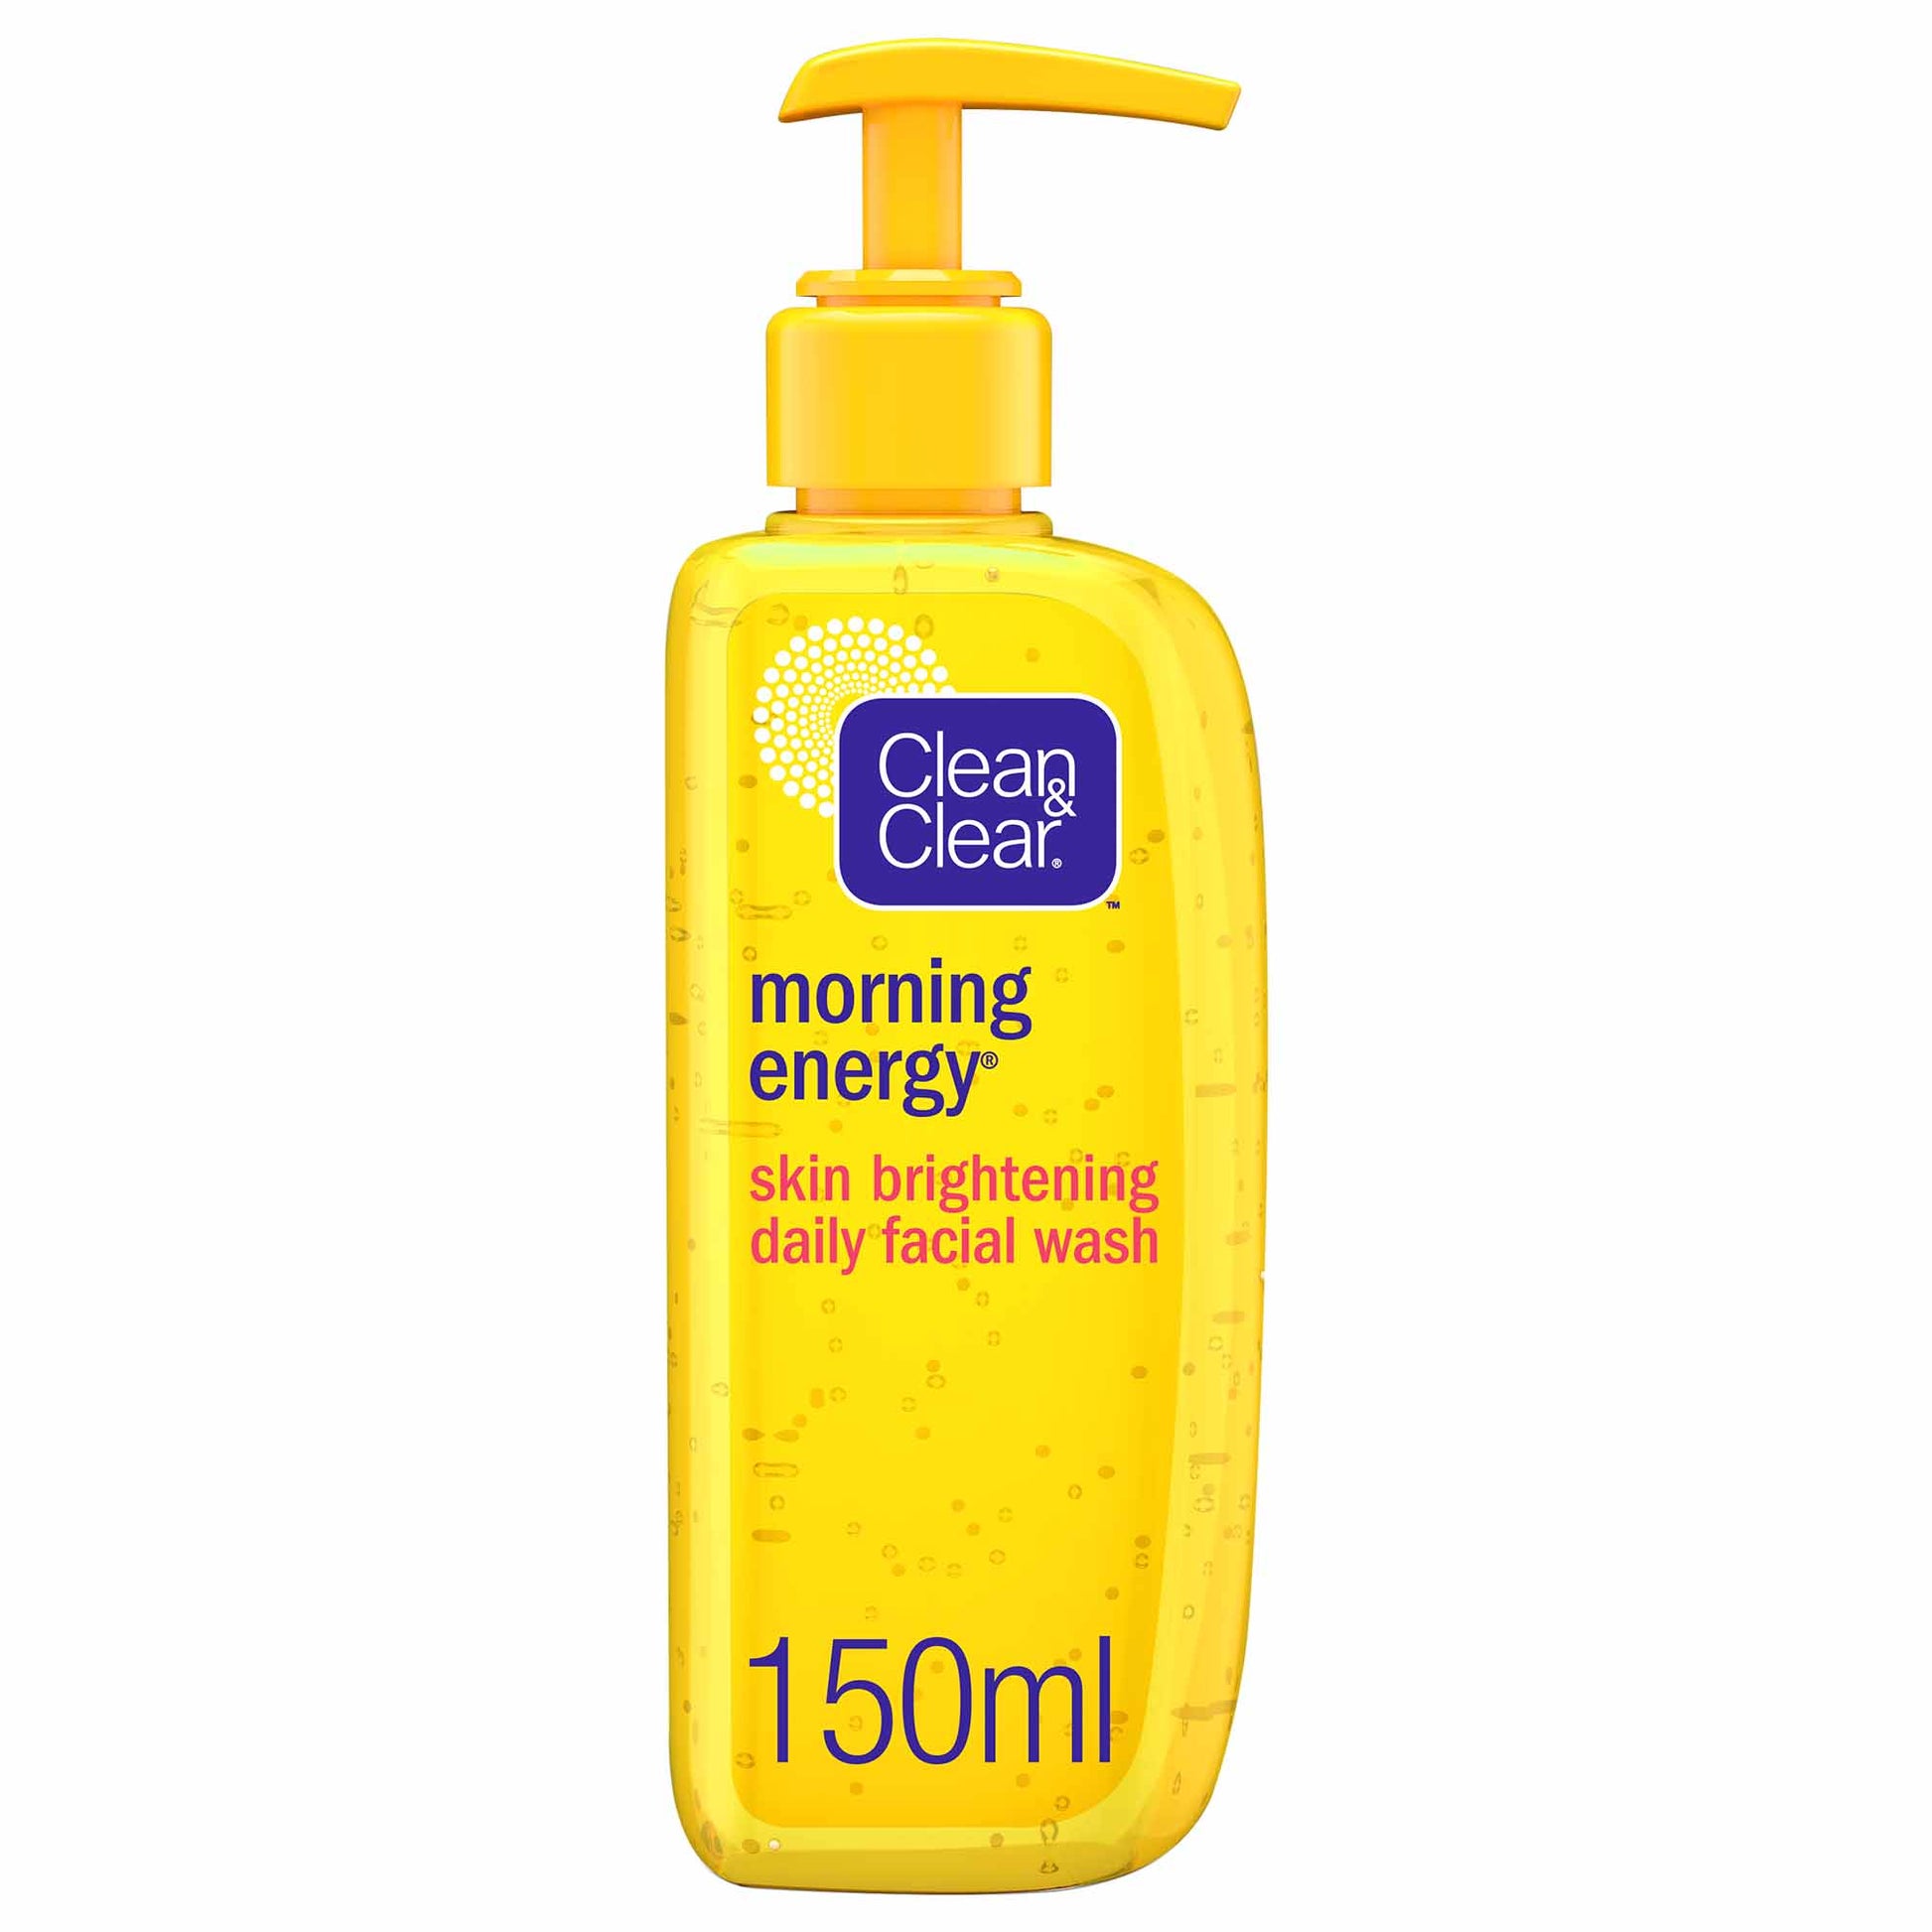 Clean & clear, facial wash, morning energy, skin brightening, 150ml